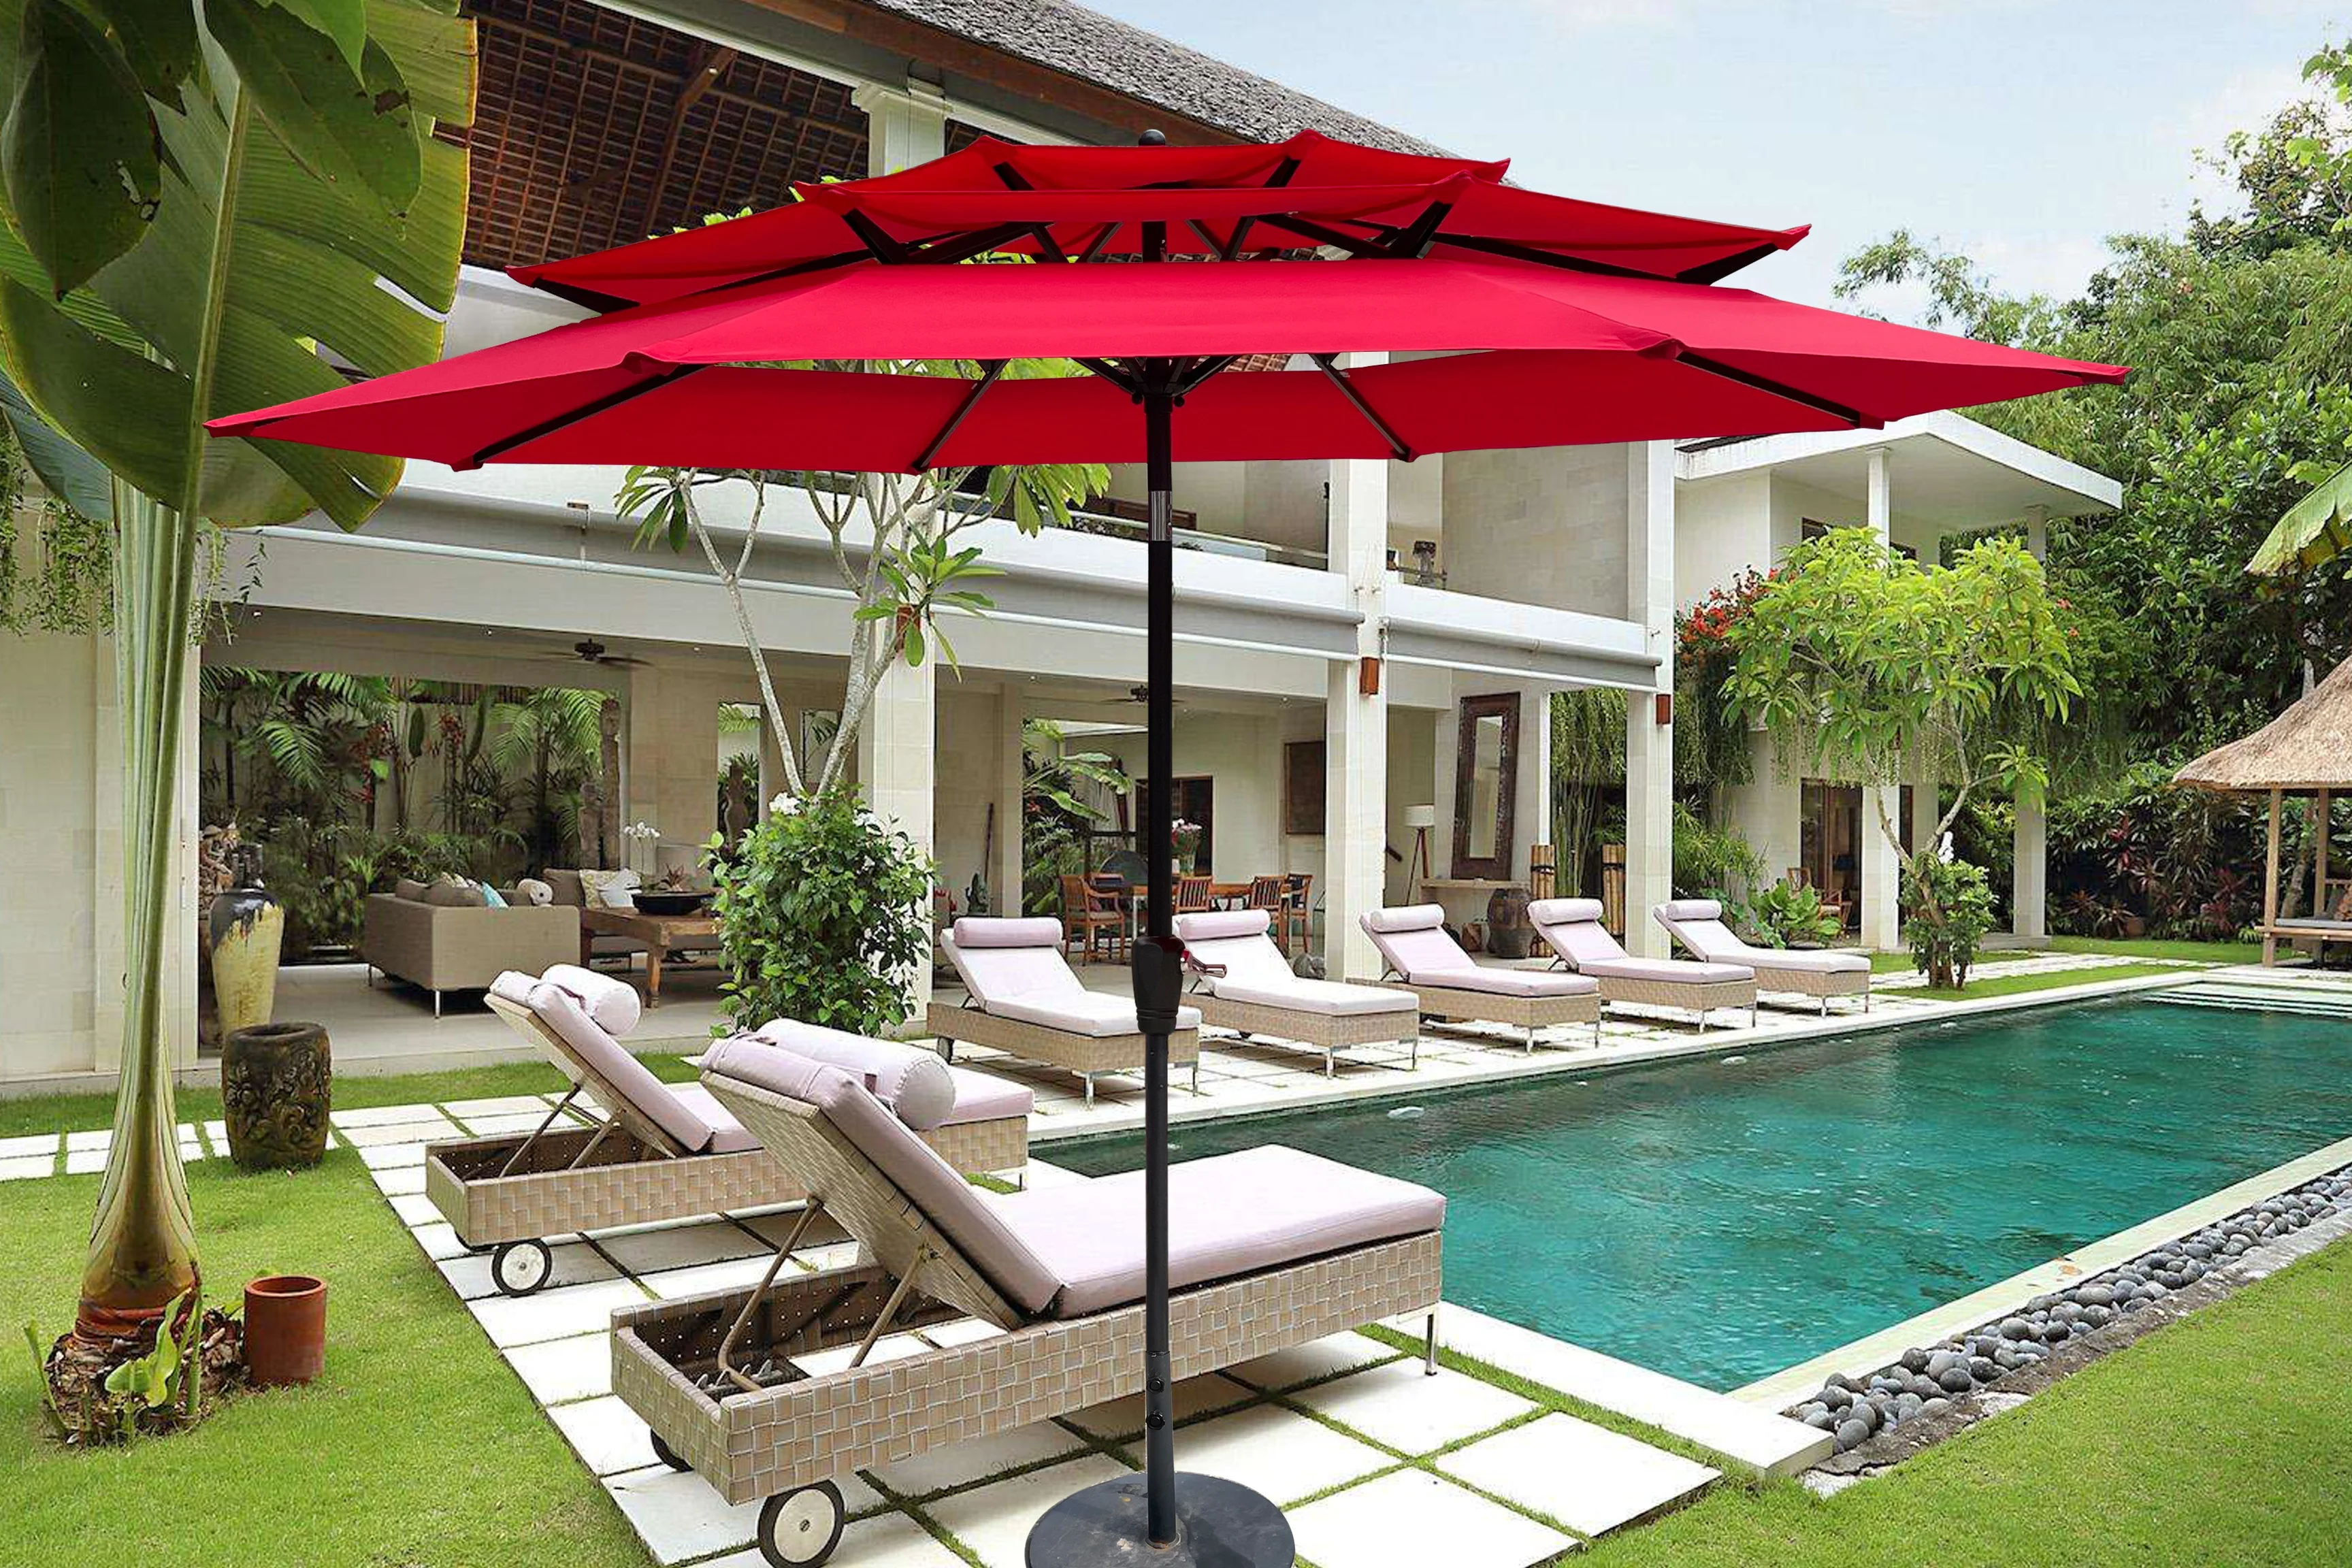 

9Ft 3-Tiers Outdoor Patio Umbrella With Crank And Tilt And Wind Vents For Garden Deck Backyard Pool Shade Outside Deck